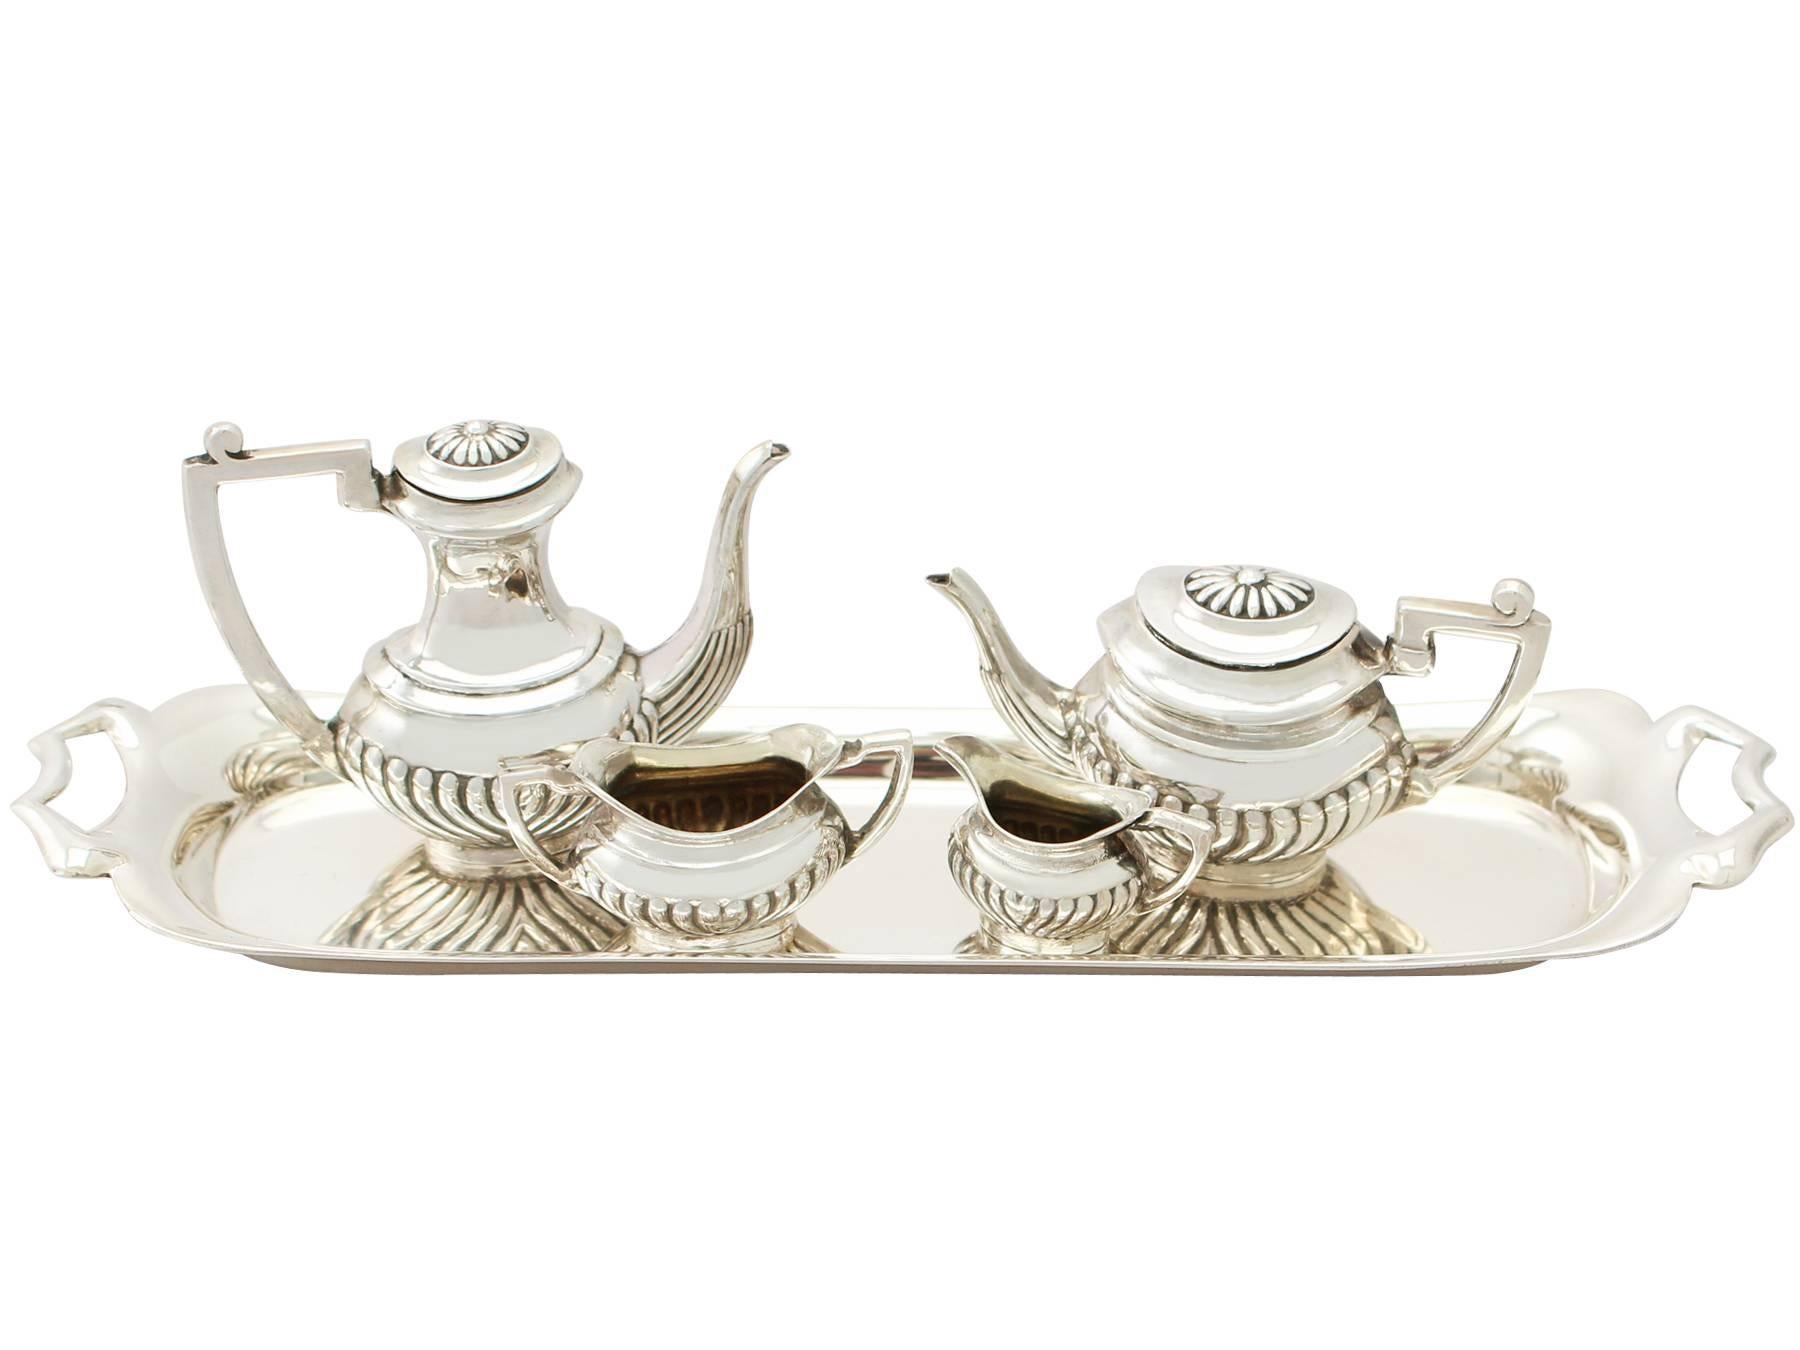 An exceptional, fine and impressive vintage Elizabeth II English sterling silver miniature Queen Anne style four piece tea & coffee service with a matching tray - boxed; part of our silverware collection

The exceptional vintage Elizabeth II